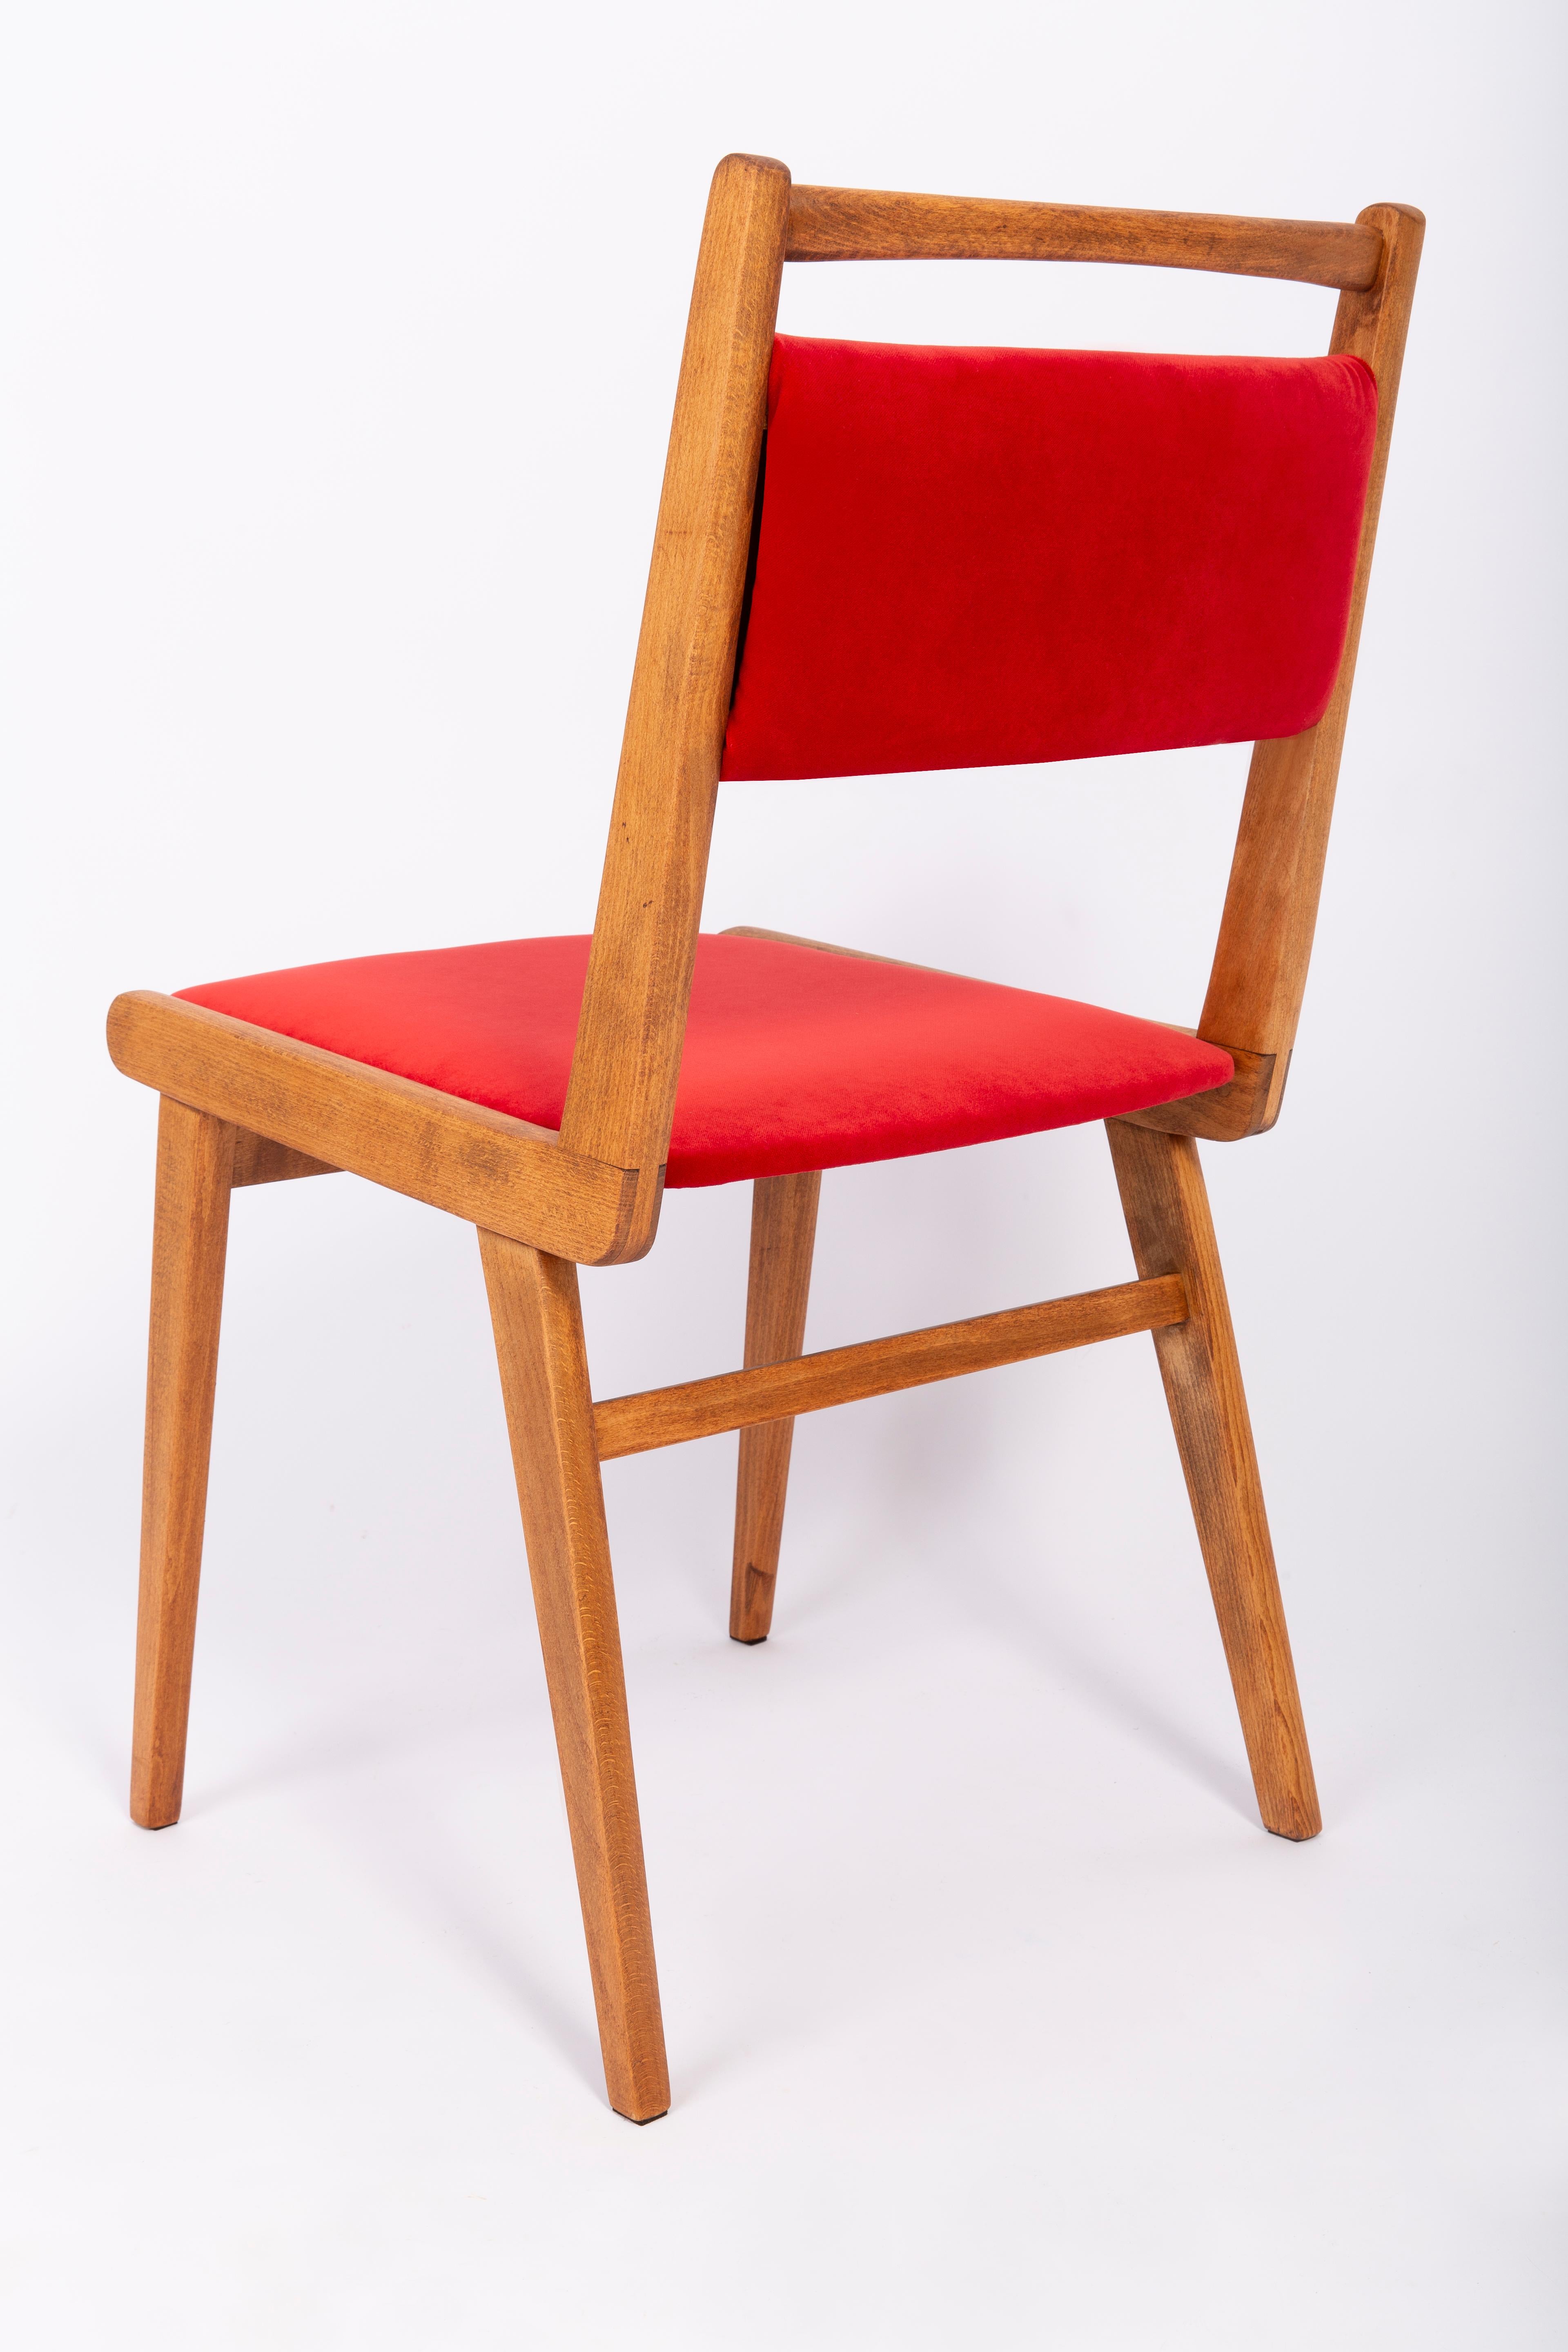 Set of Two 20th Century White and Red Velvet Chairs, Poland, 1960s For Sale 11